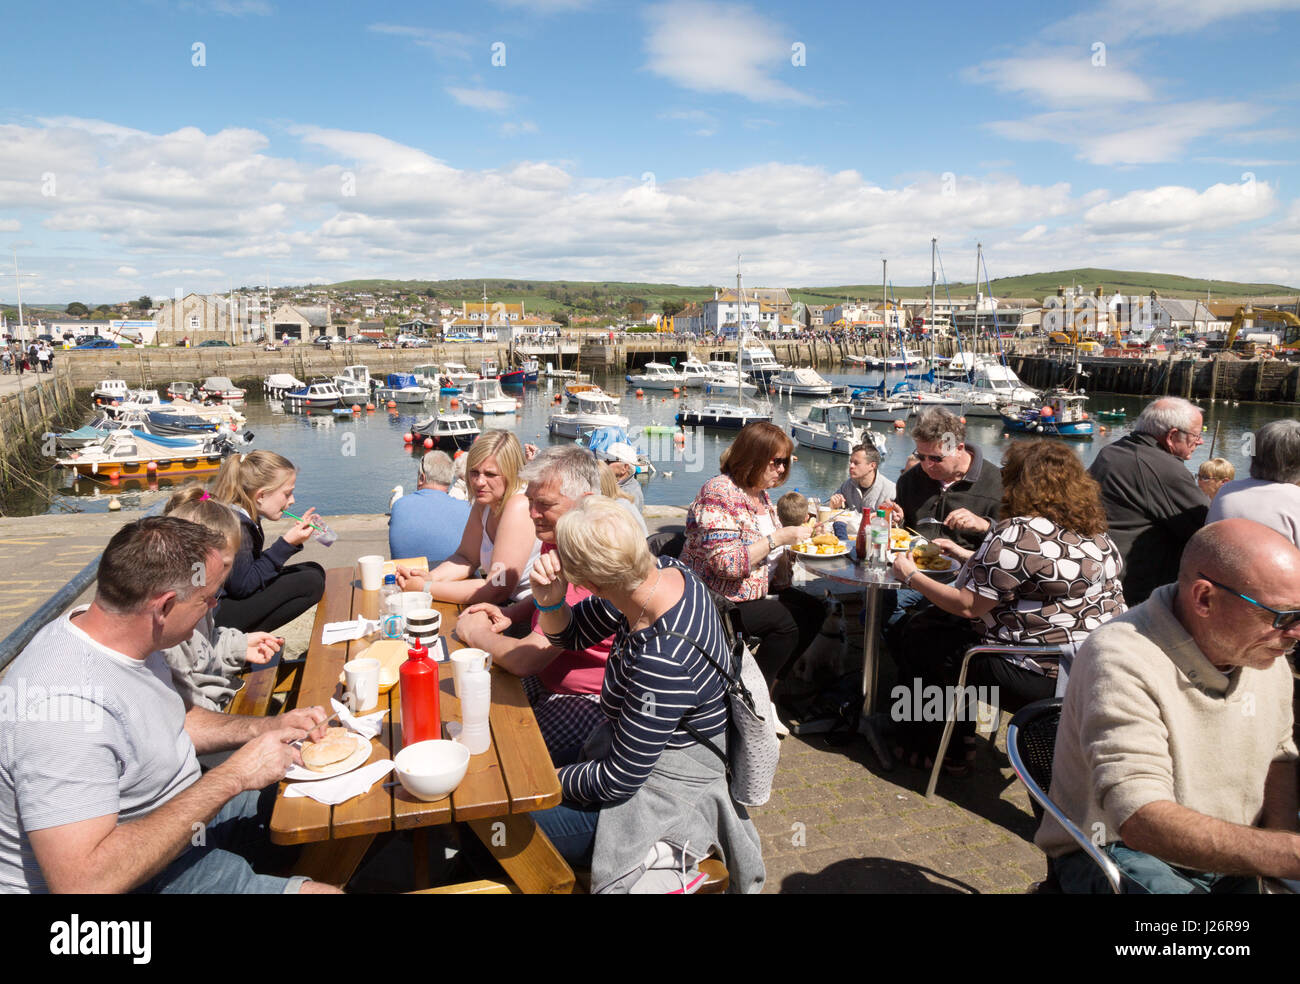 Crowds of people eating at cafes on a sunny day, West Bay harbour, West Bay, Dorset England UK Stock Photo